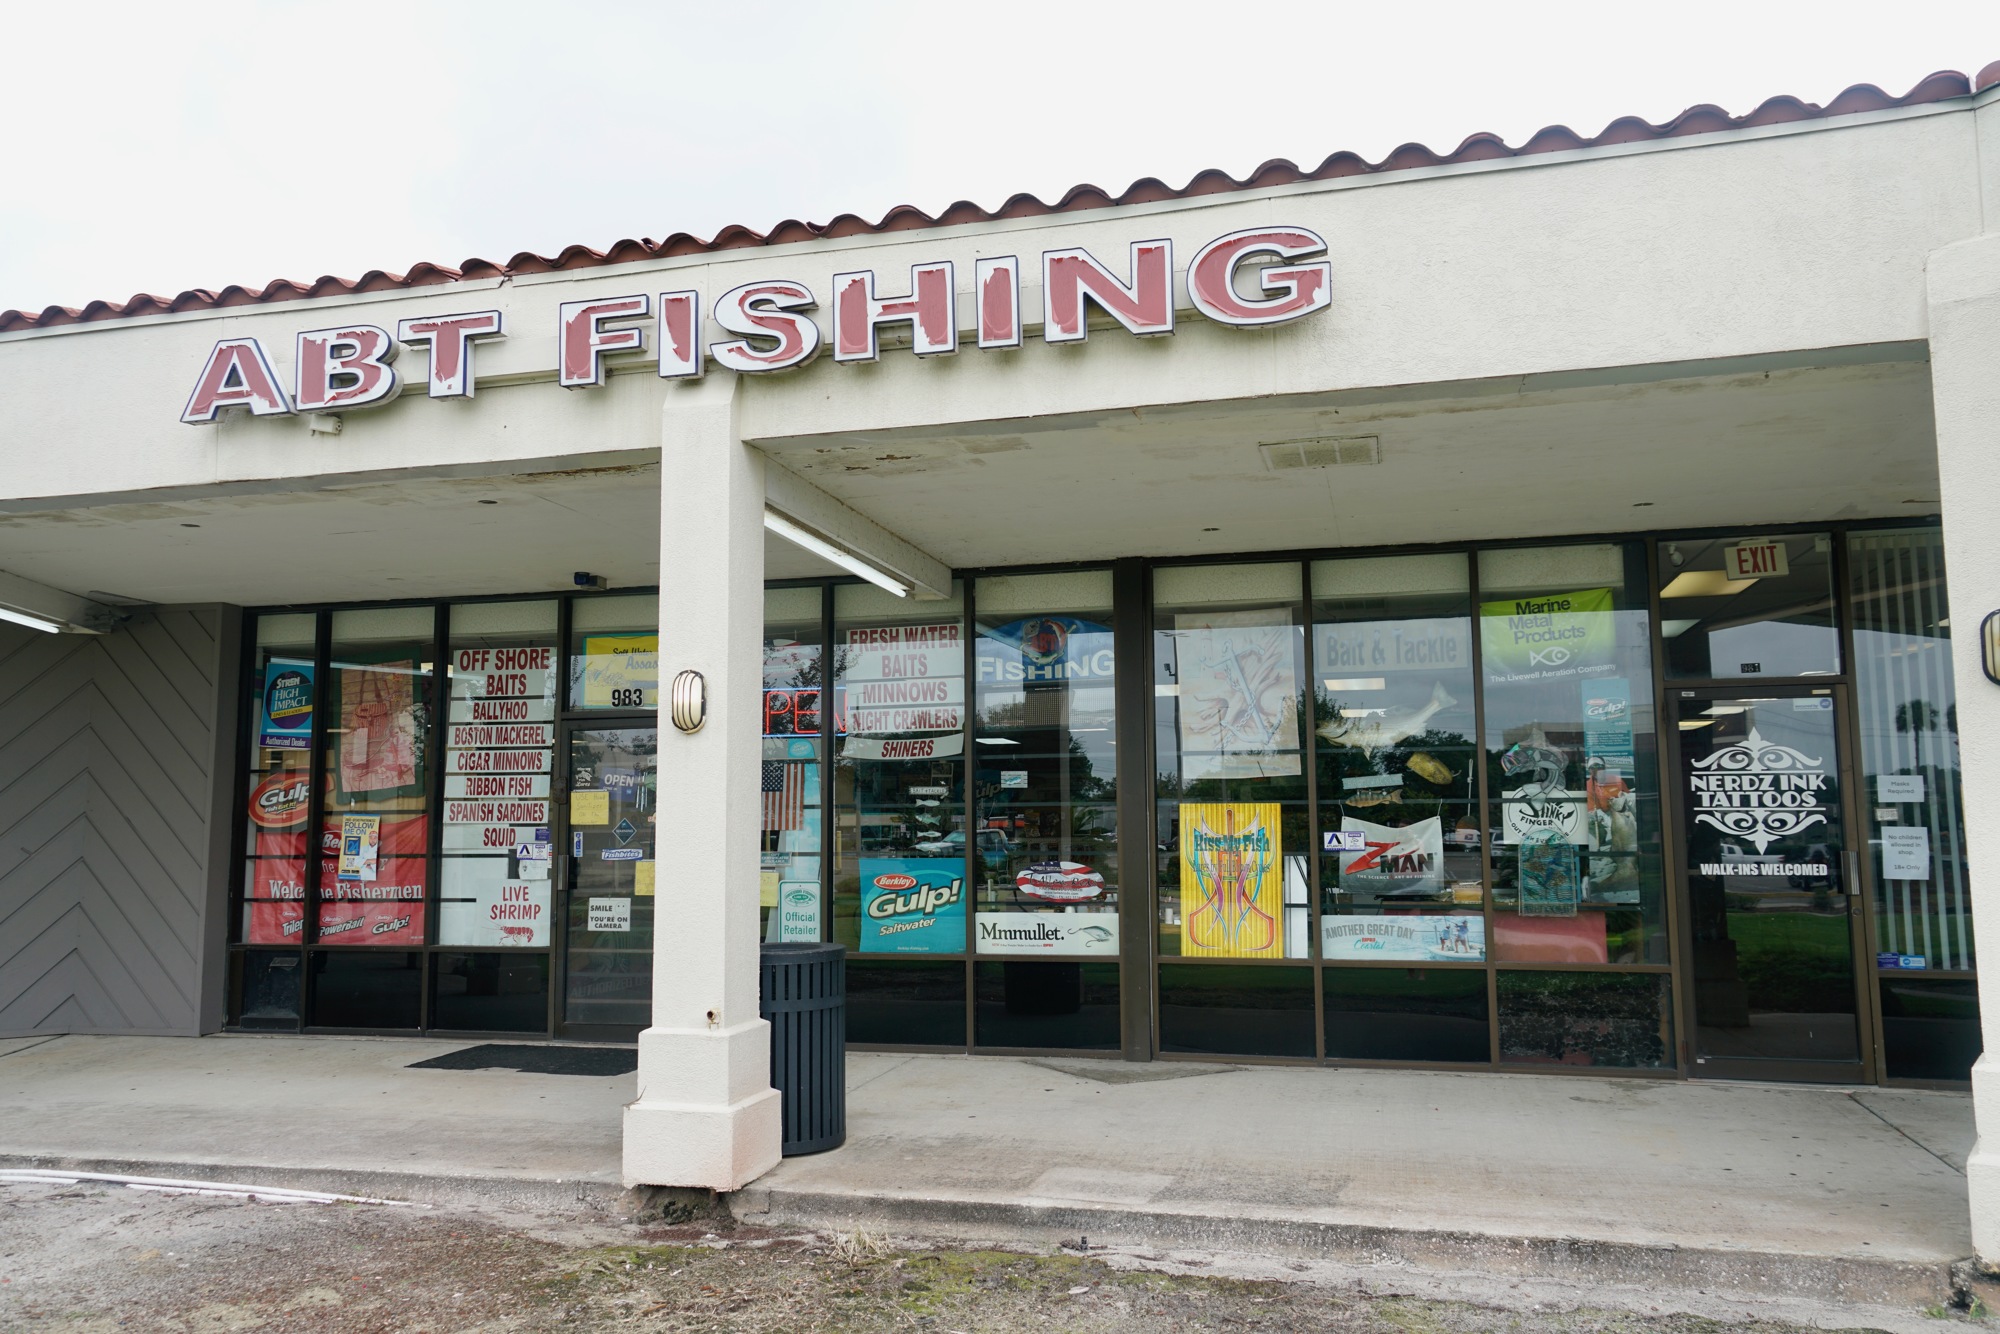 The official name of the shop is Arlington Bait and Tackle Fishing but it became ABT Fishing when the full name was too expensive to put on a sign.